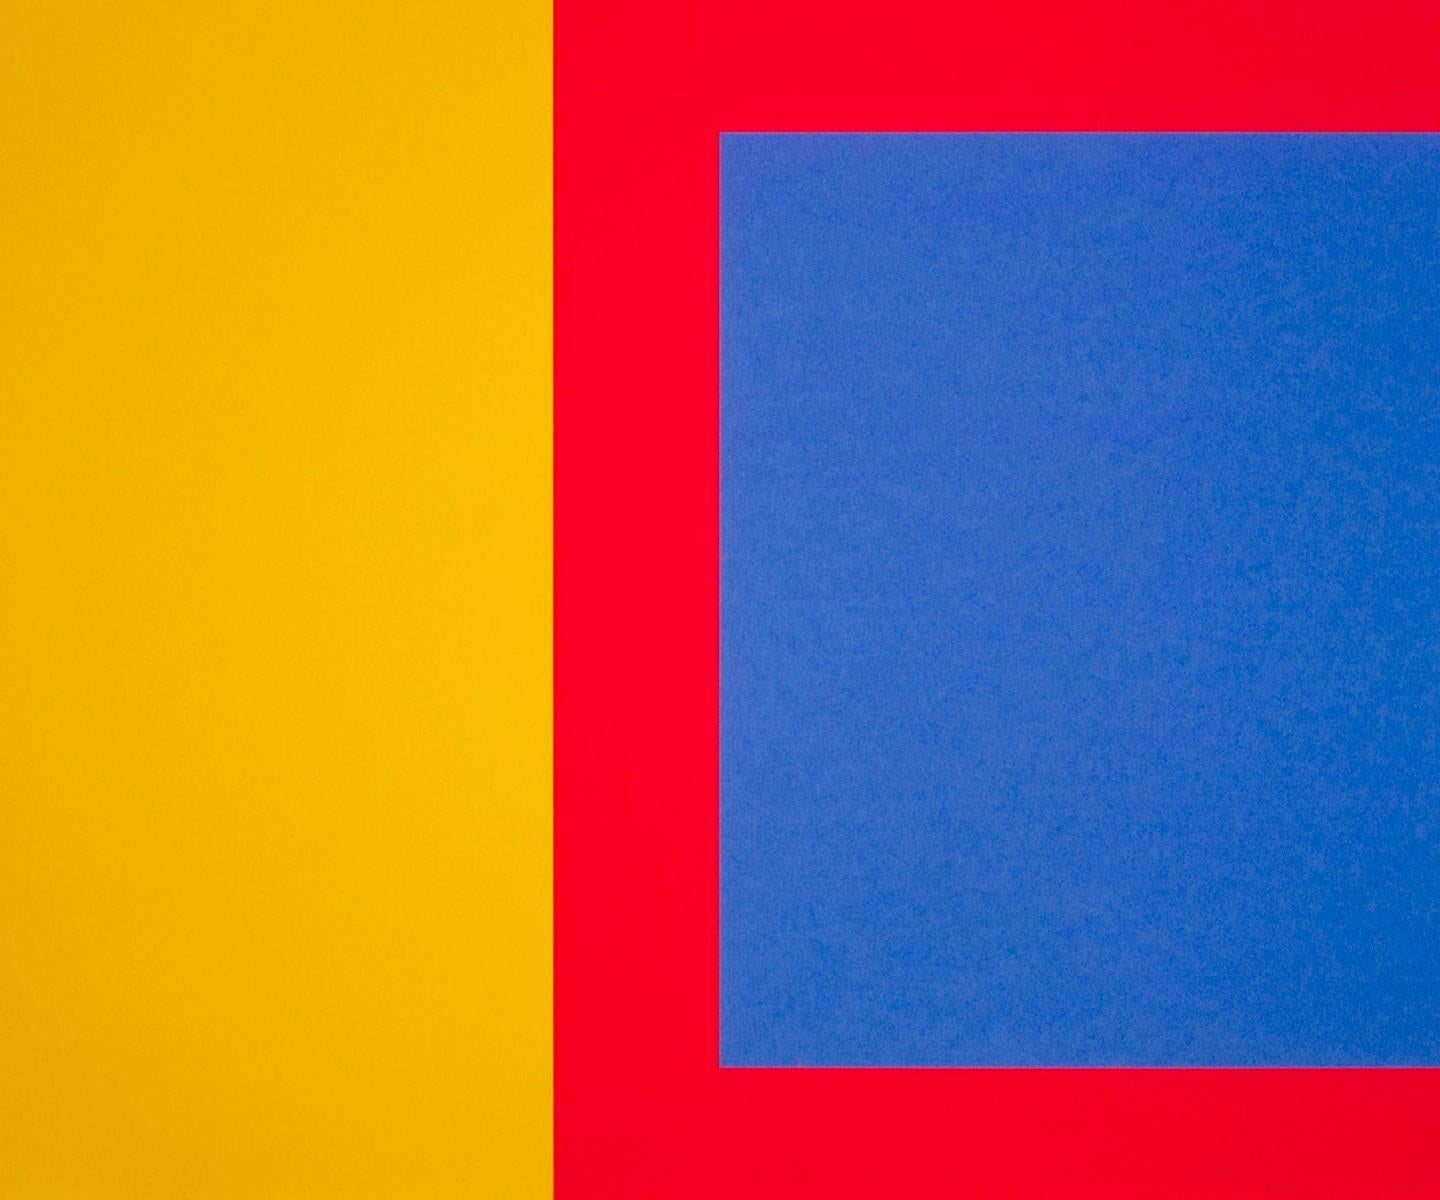 Richard Caldicott Color Photograph - Untitled 6 (2013) (Abstract photography)